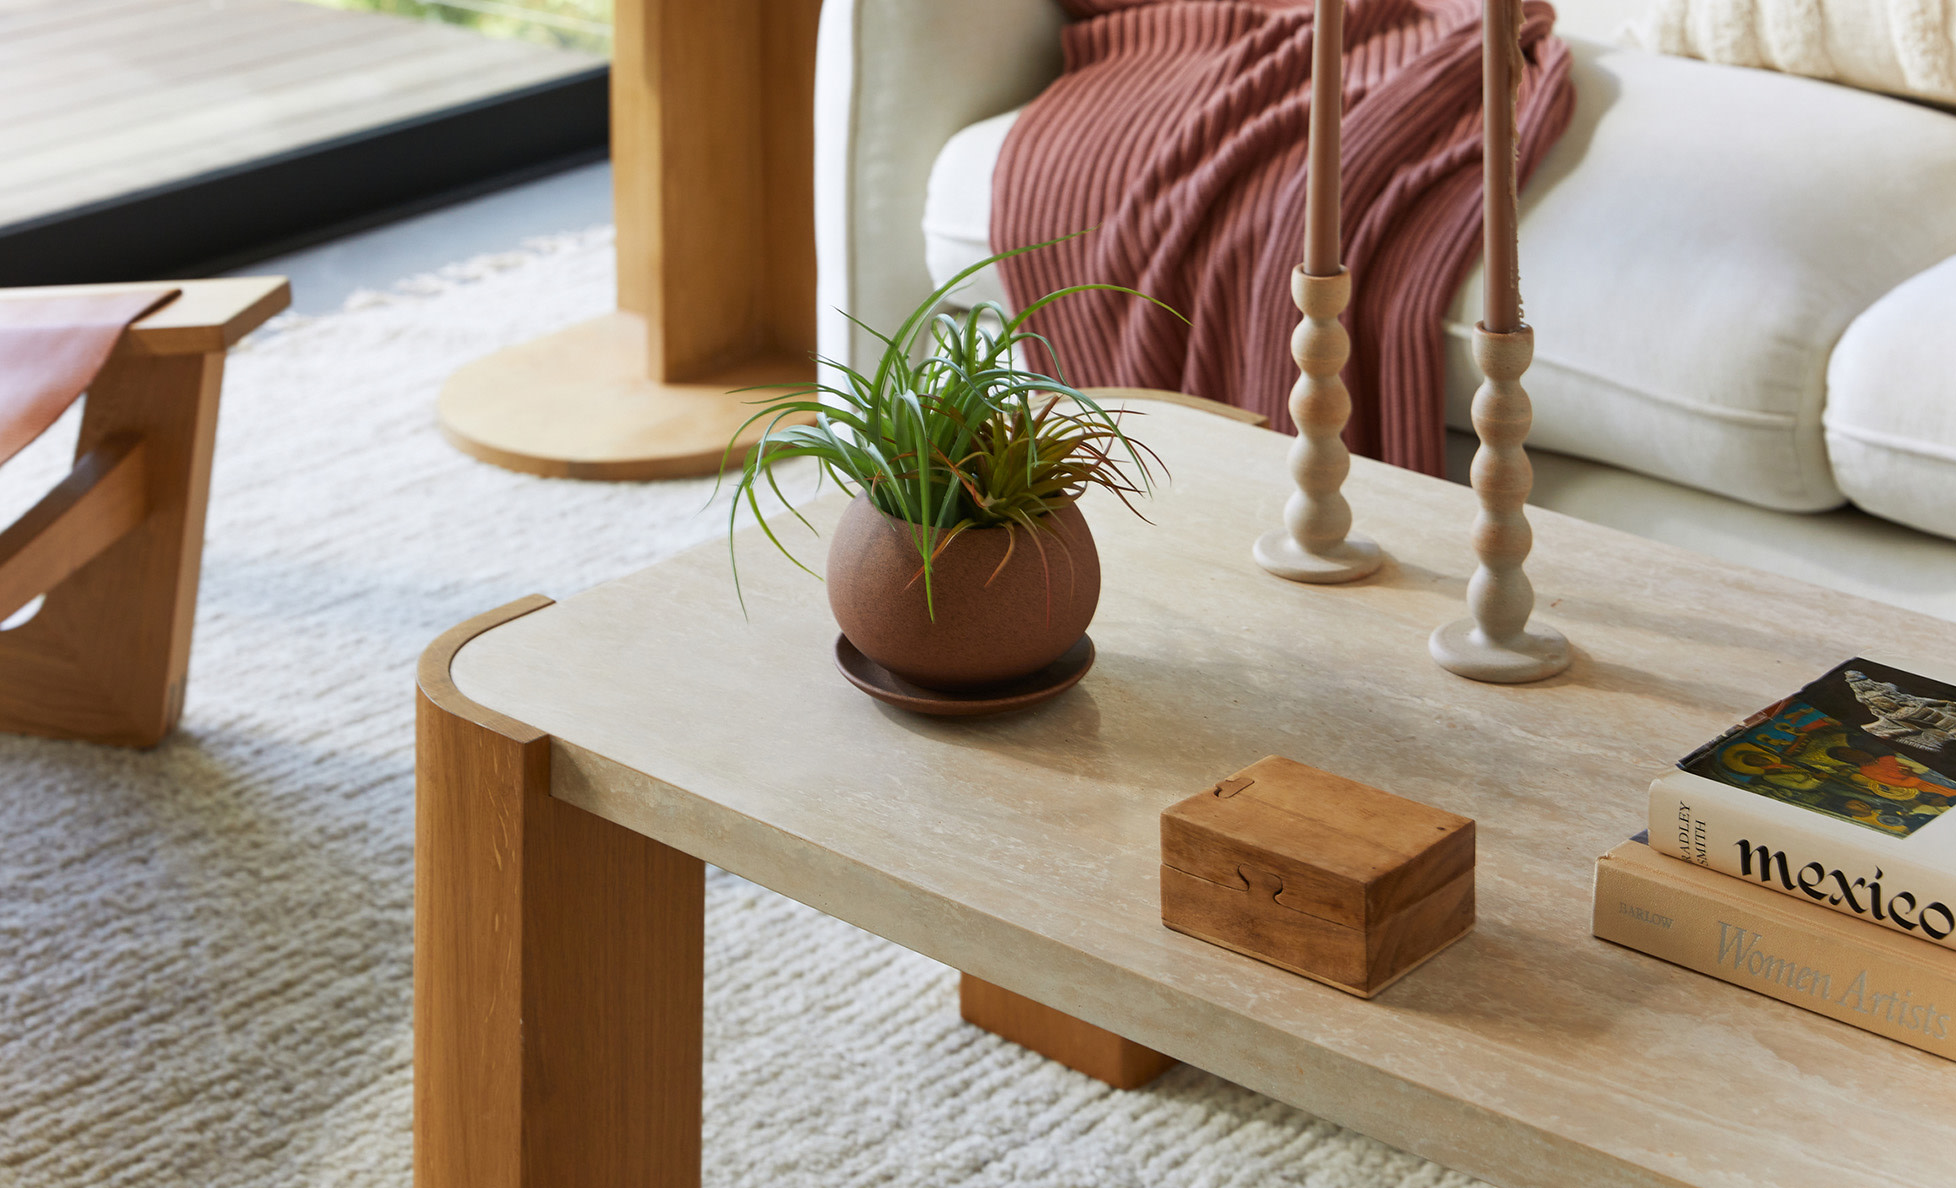 Close-up of a travertine coffee table with a potted plant and candlesticks on top